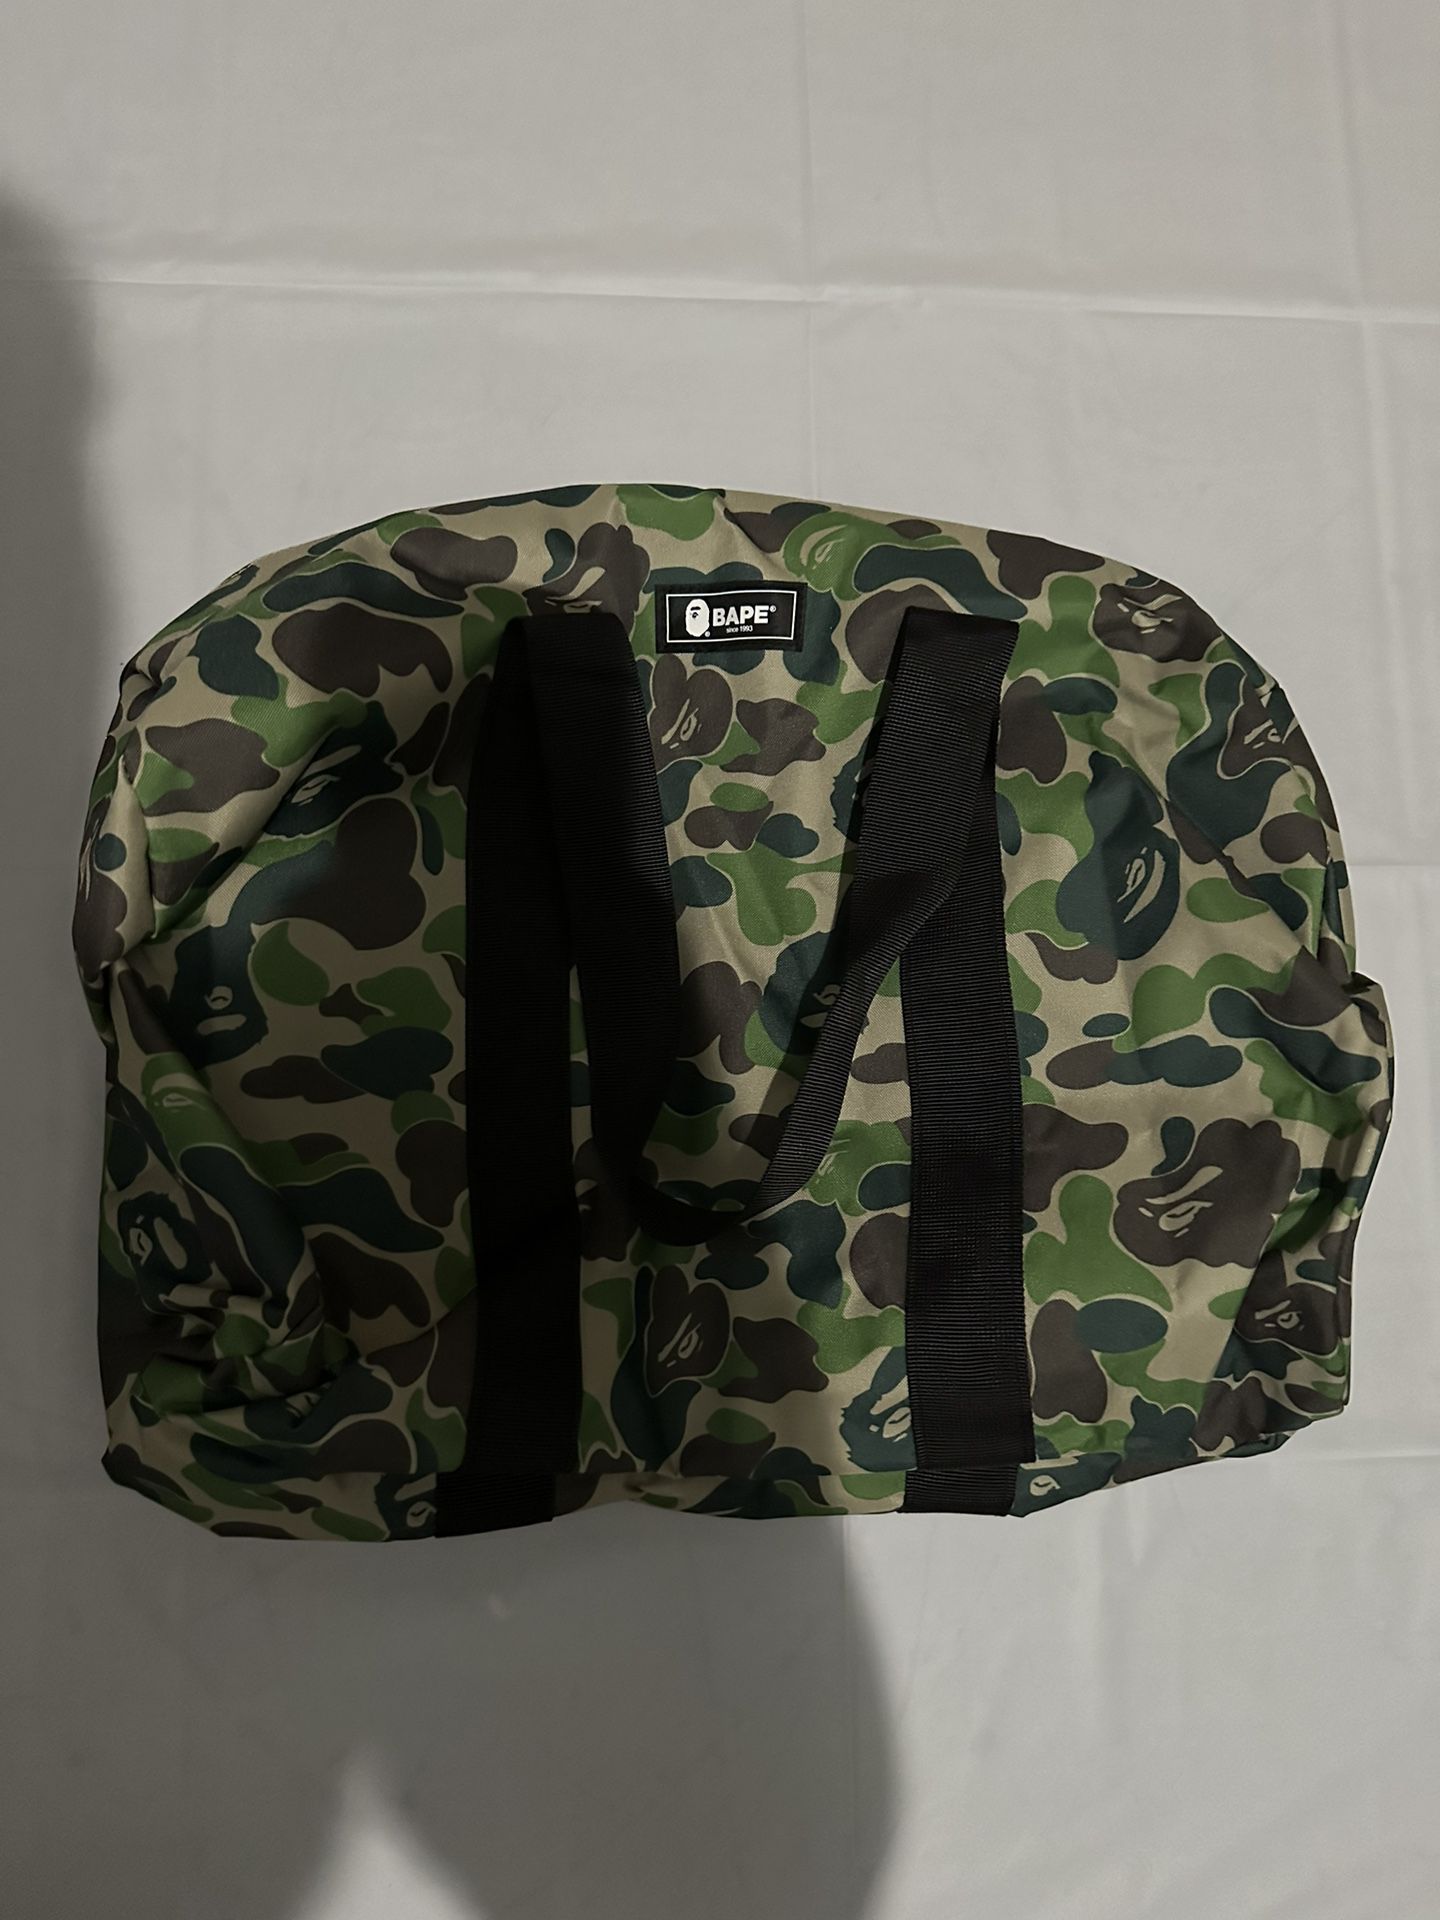 BAPE Duffle Black Camo Carry On Travel Gym Bag Ds New for Sale in Chicago,  IL - OfferUp